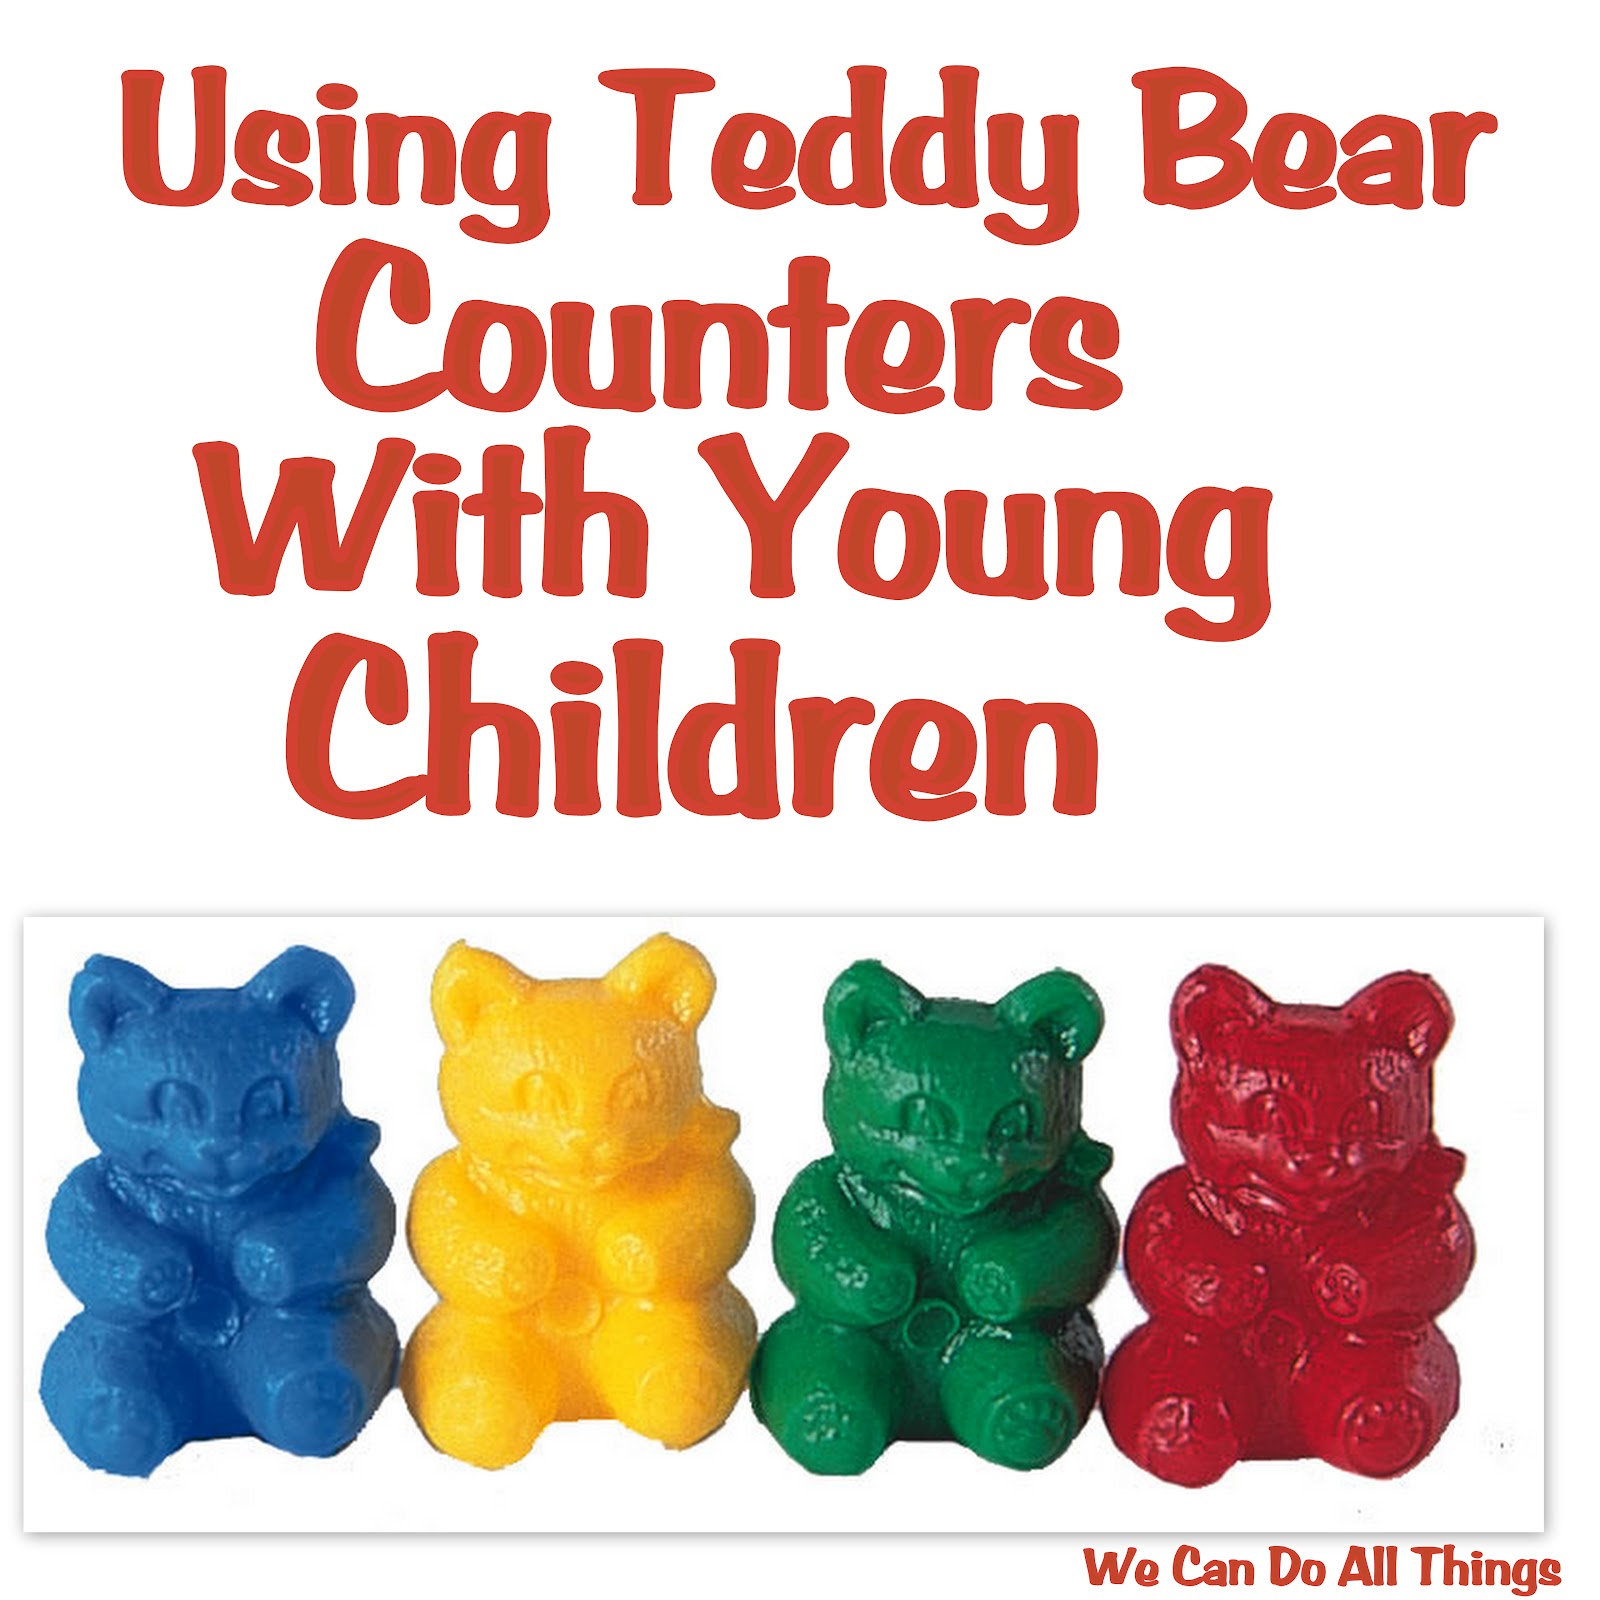 we can do all things: Early Learning With Teddy Bear Counters